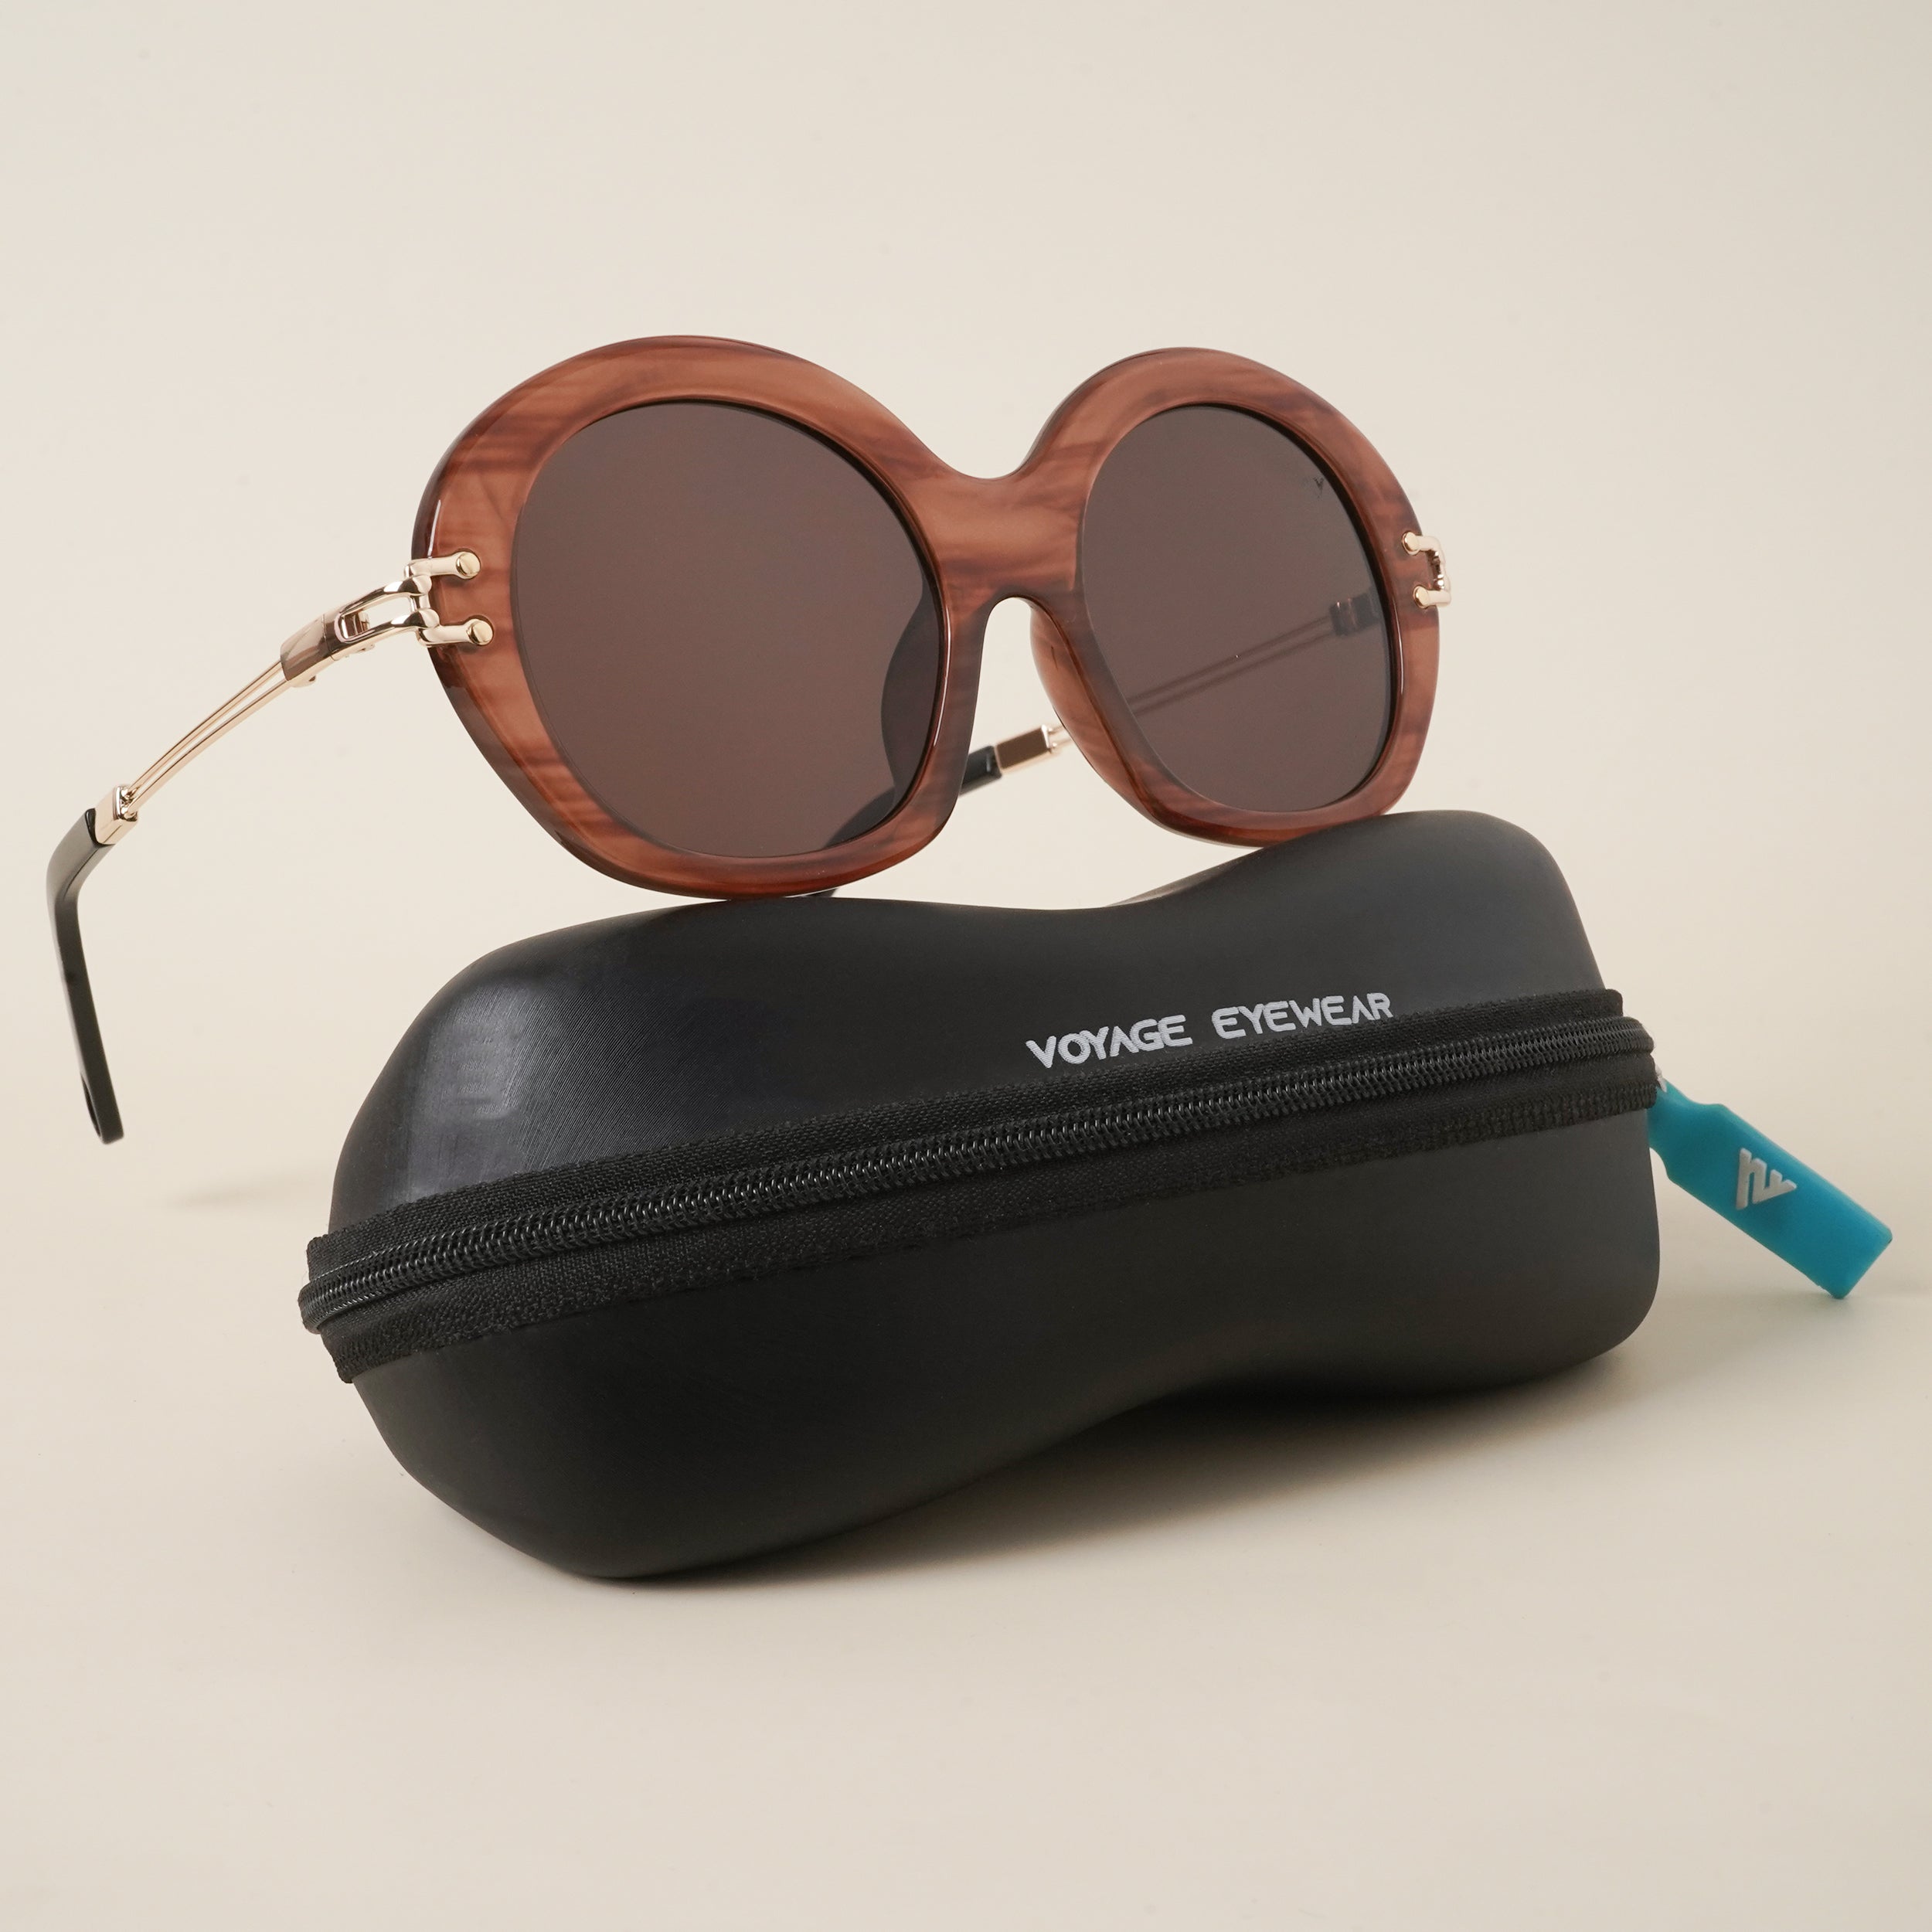 Voyage Brown Over Size Sunglasses (86585MG3910)